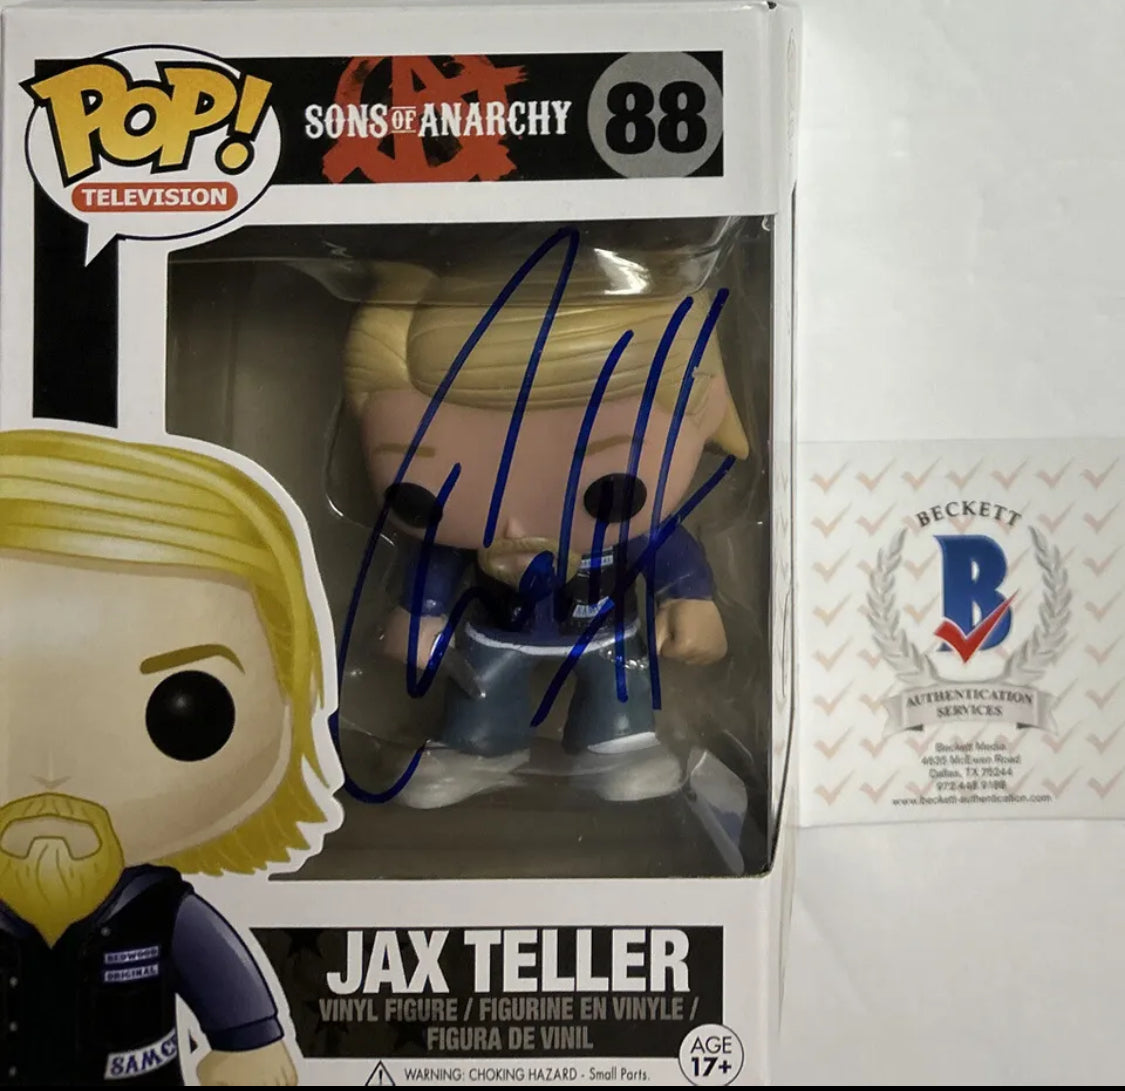 Vaulted 2013 Jax Teller #88 Funko Pop! Signed By Charlie Hunnam Sons Of Anarchy TV Series Signature is Authenticated By Beckett ✅